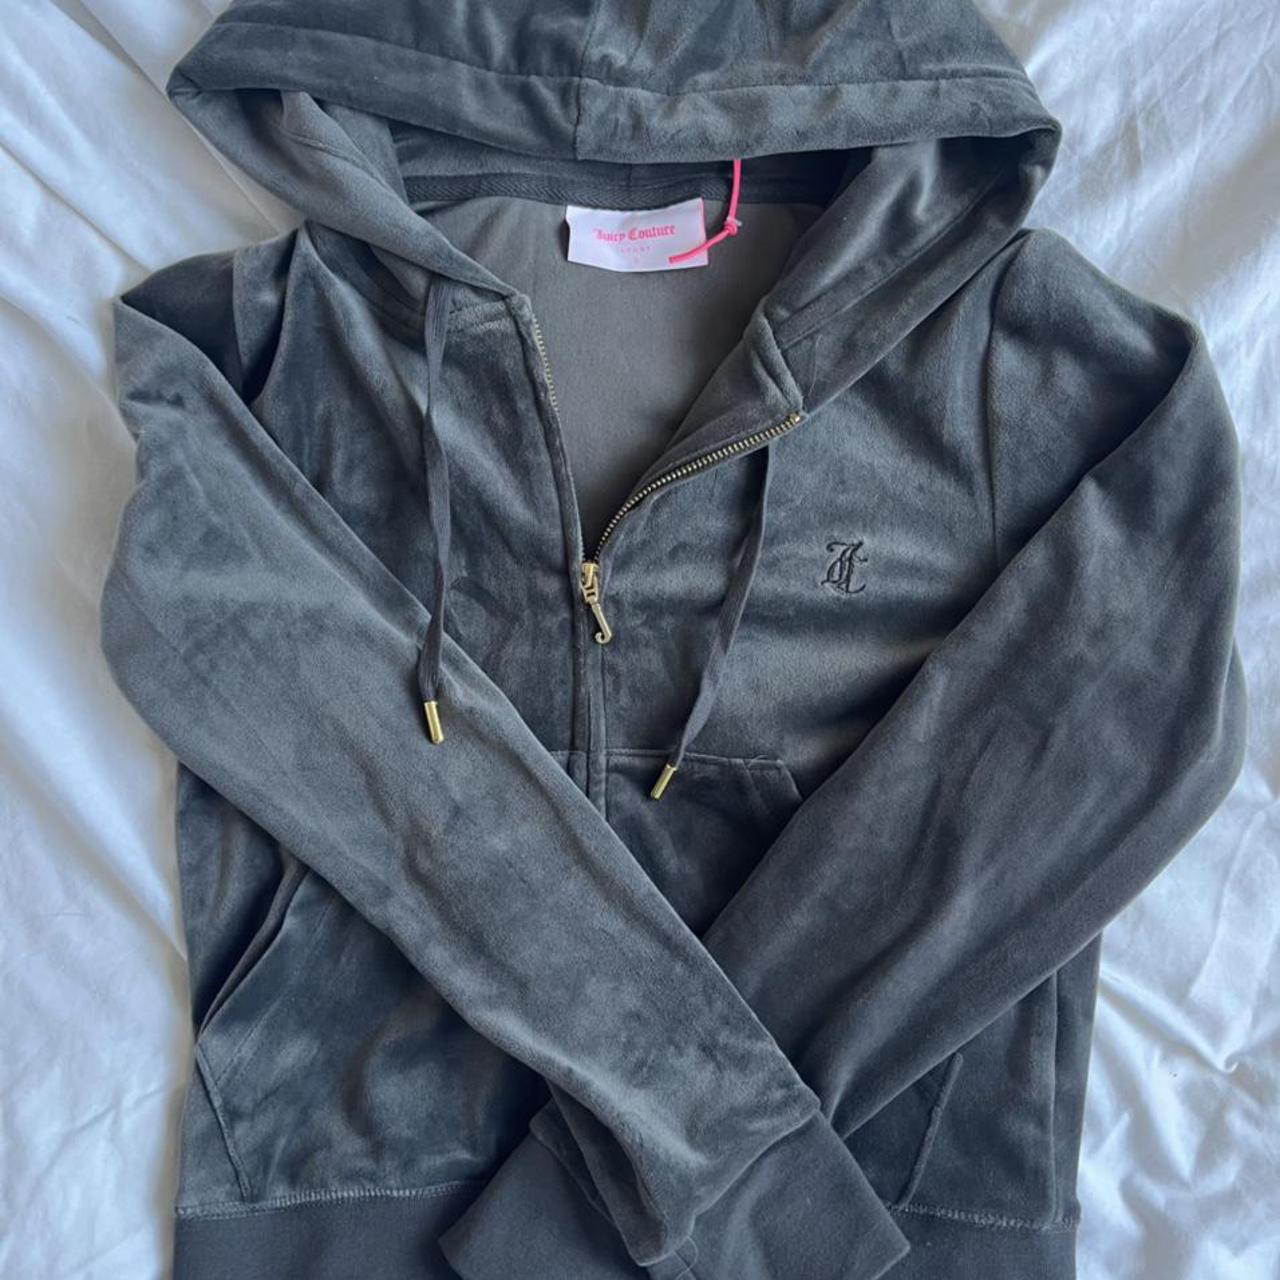 Juicy couture velour tracksuit. Charcoal grey, sold... - Depop